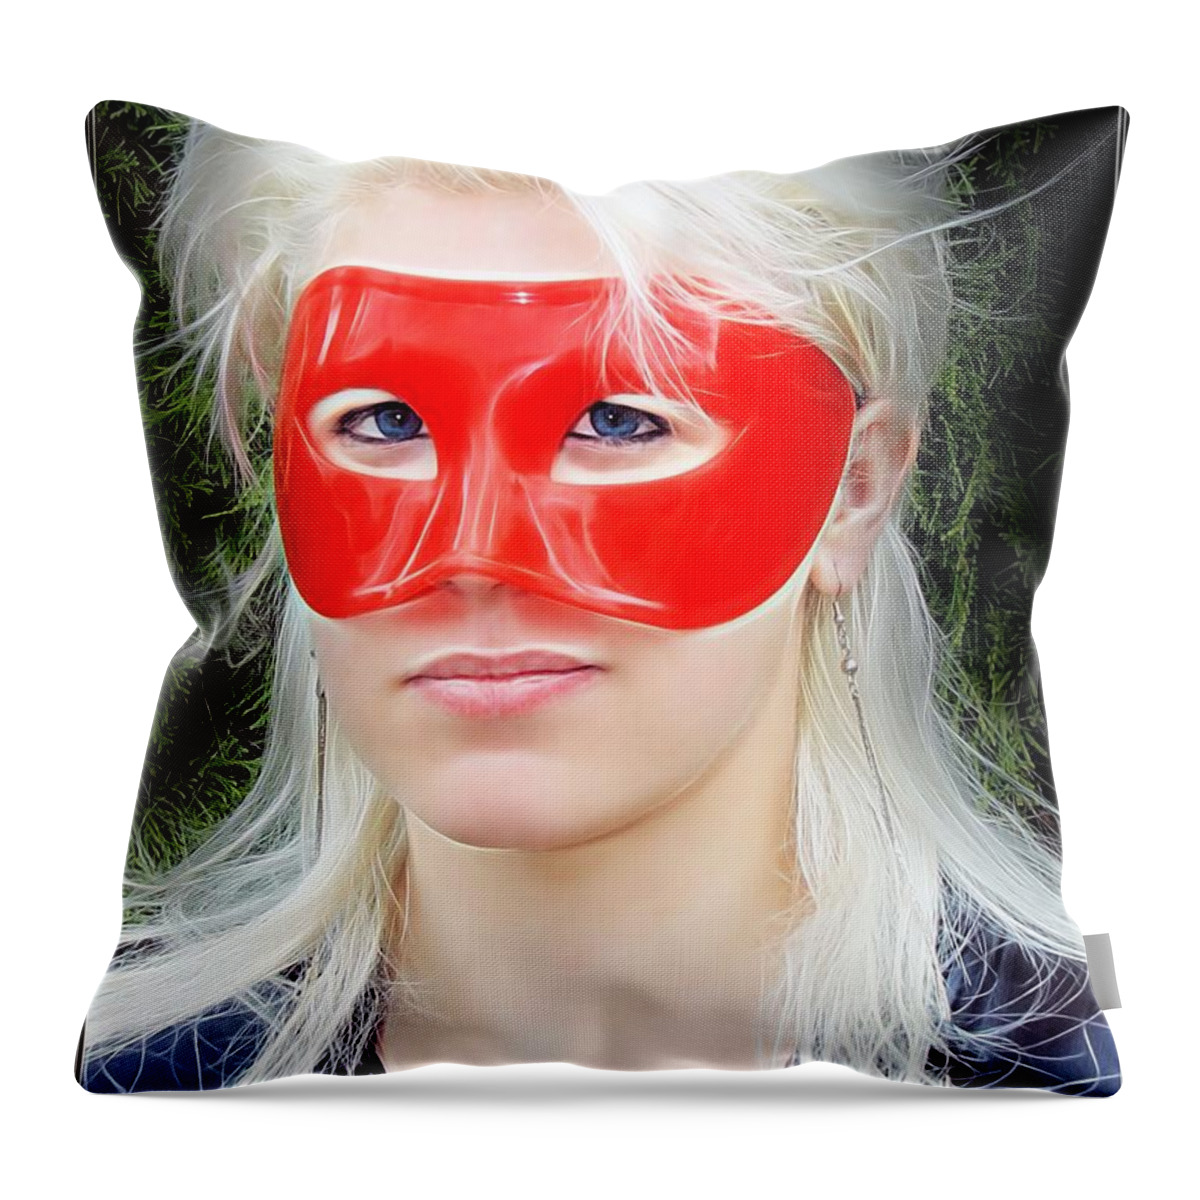 Fantasy Throw Pillow featuring the painting The Gaze of A Heroine by Jon Volden